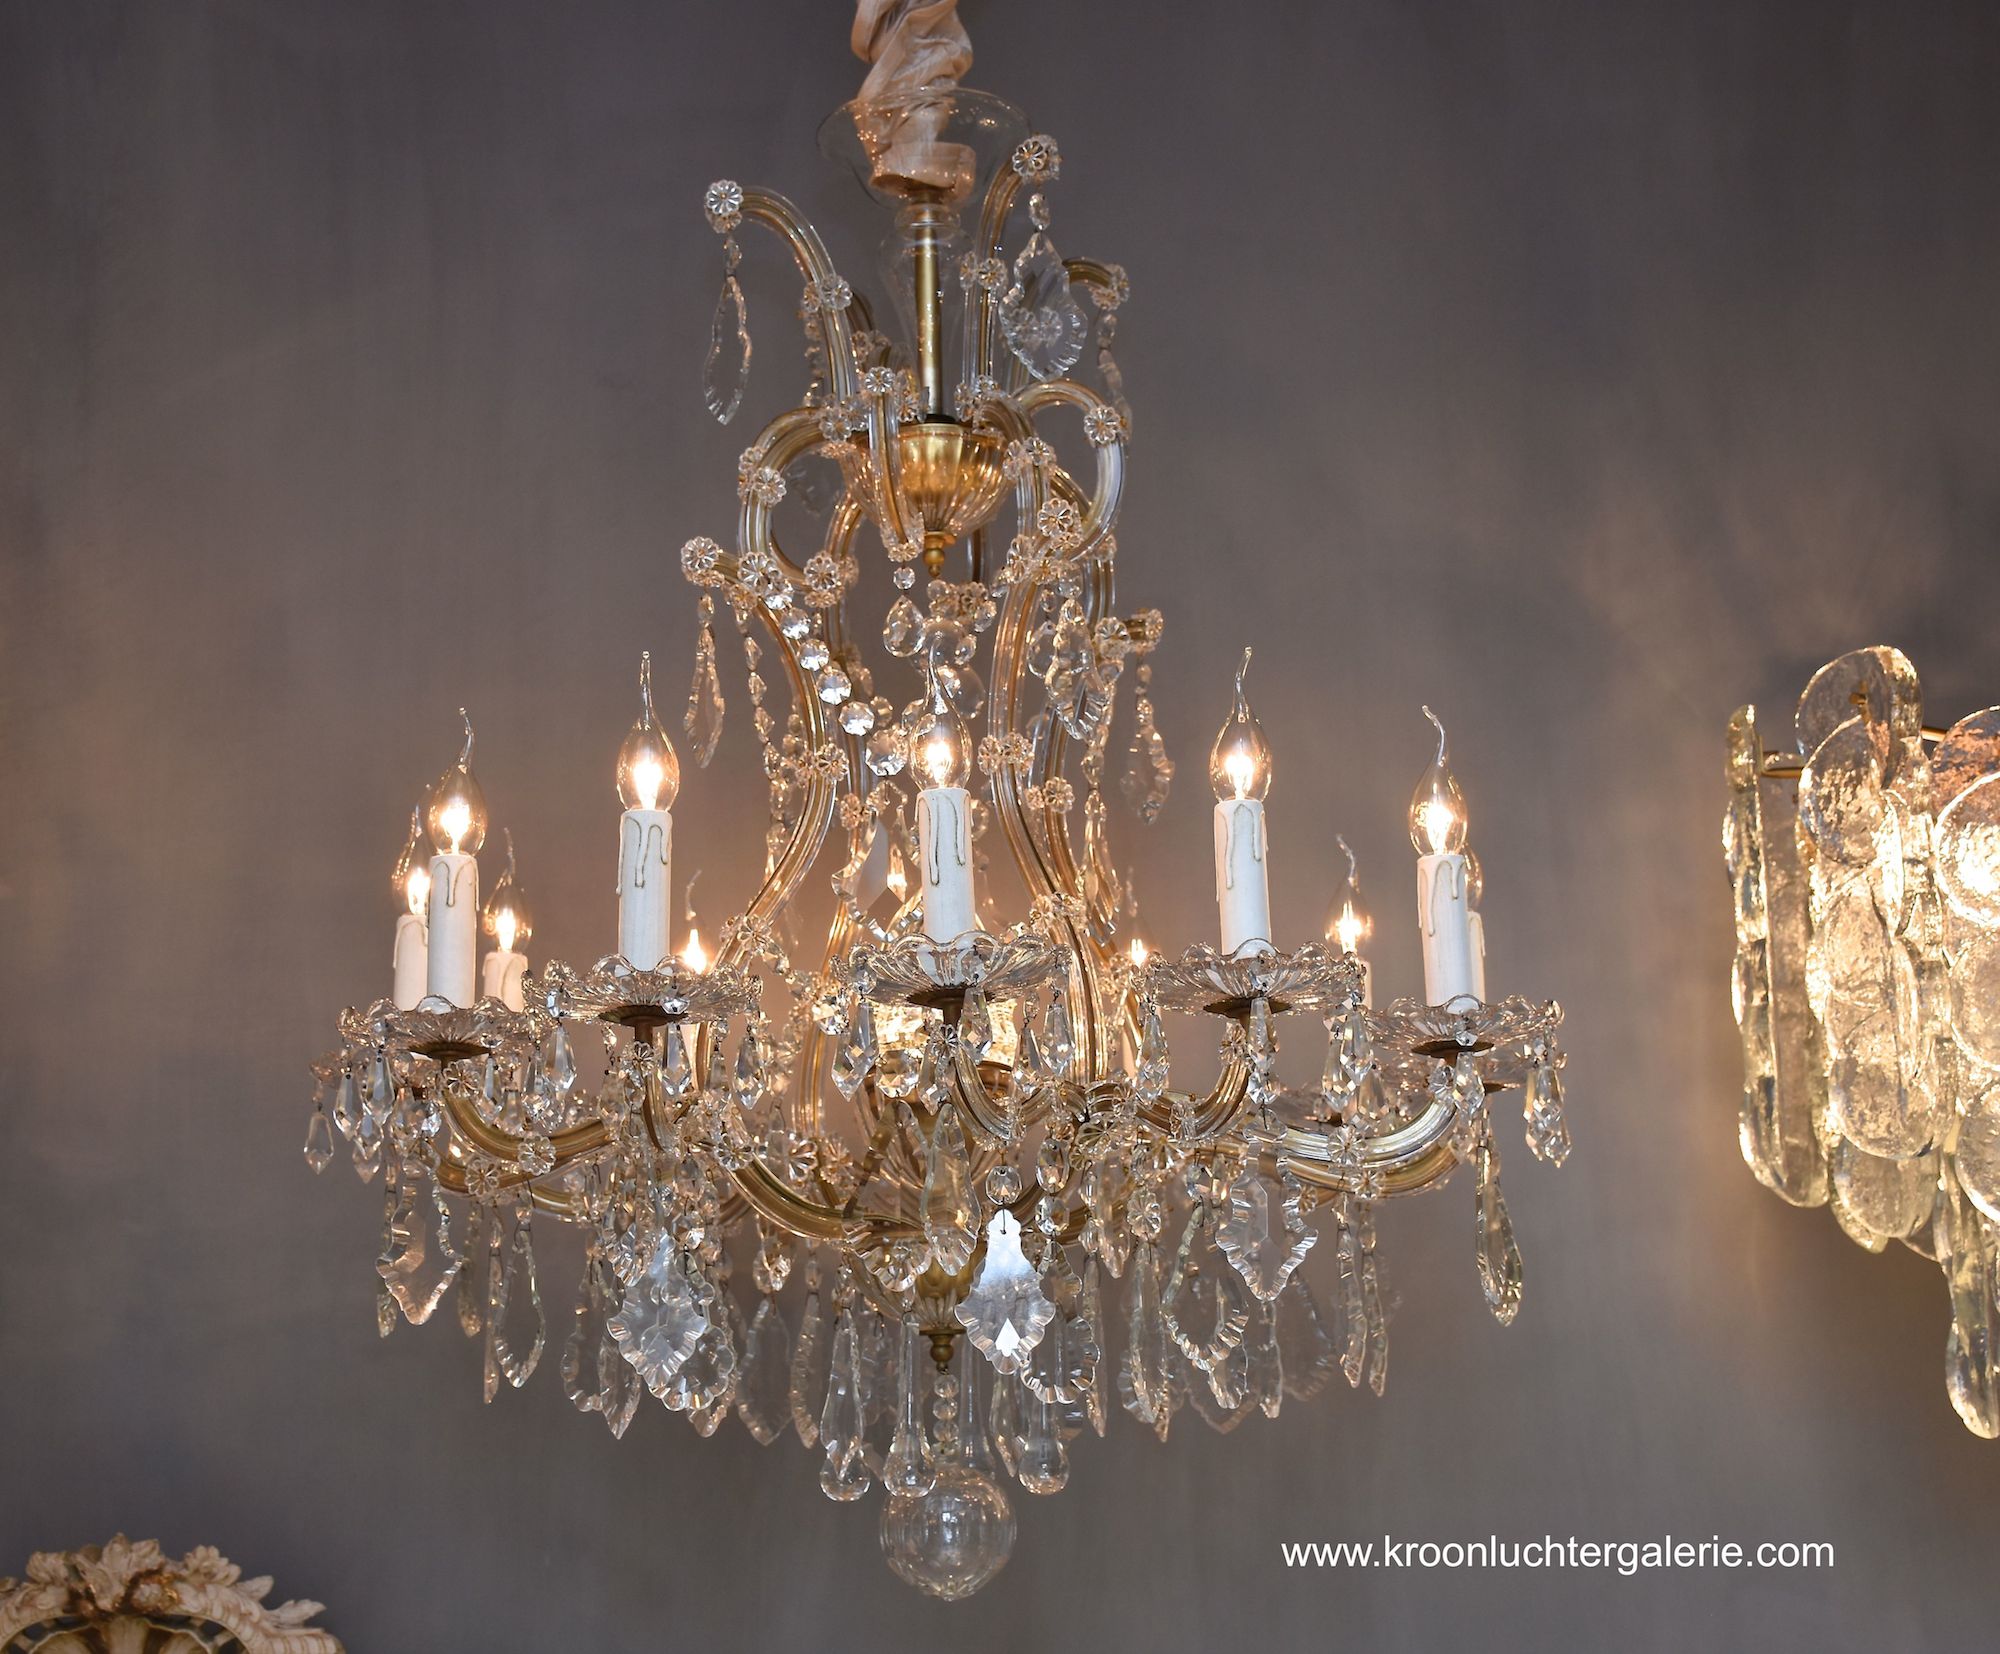 Maria Theresia chandelier with 13 light